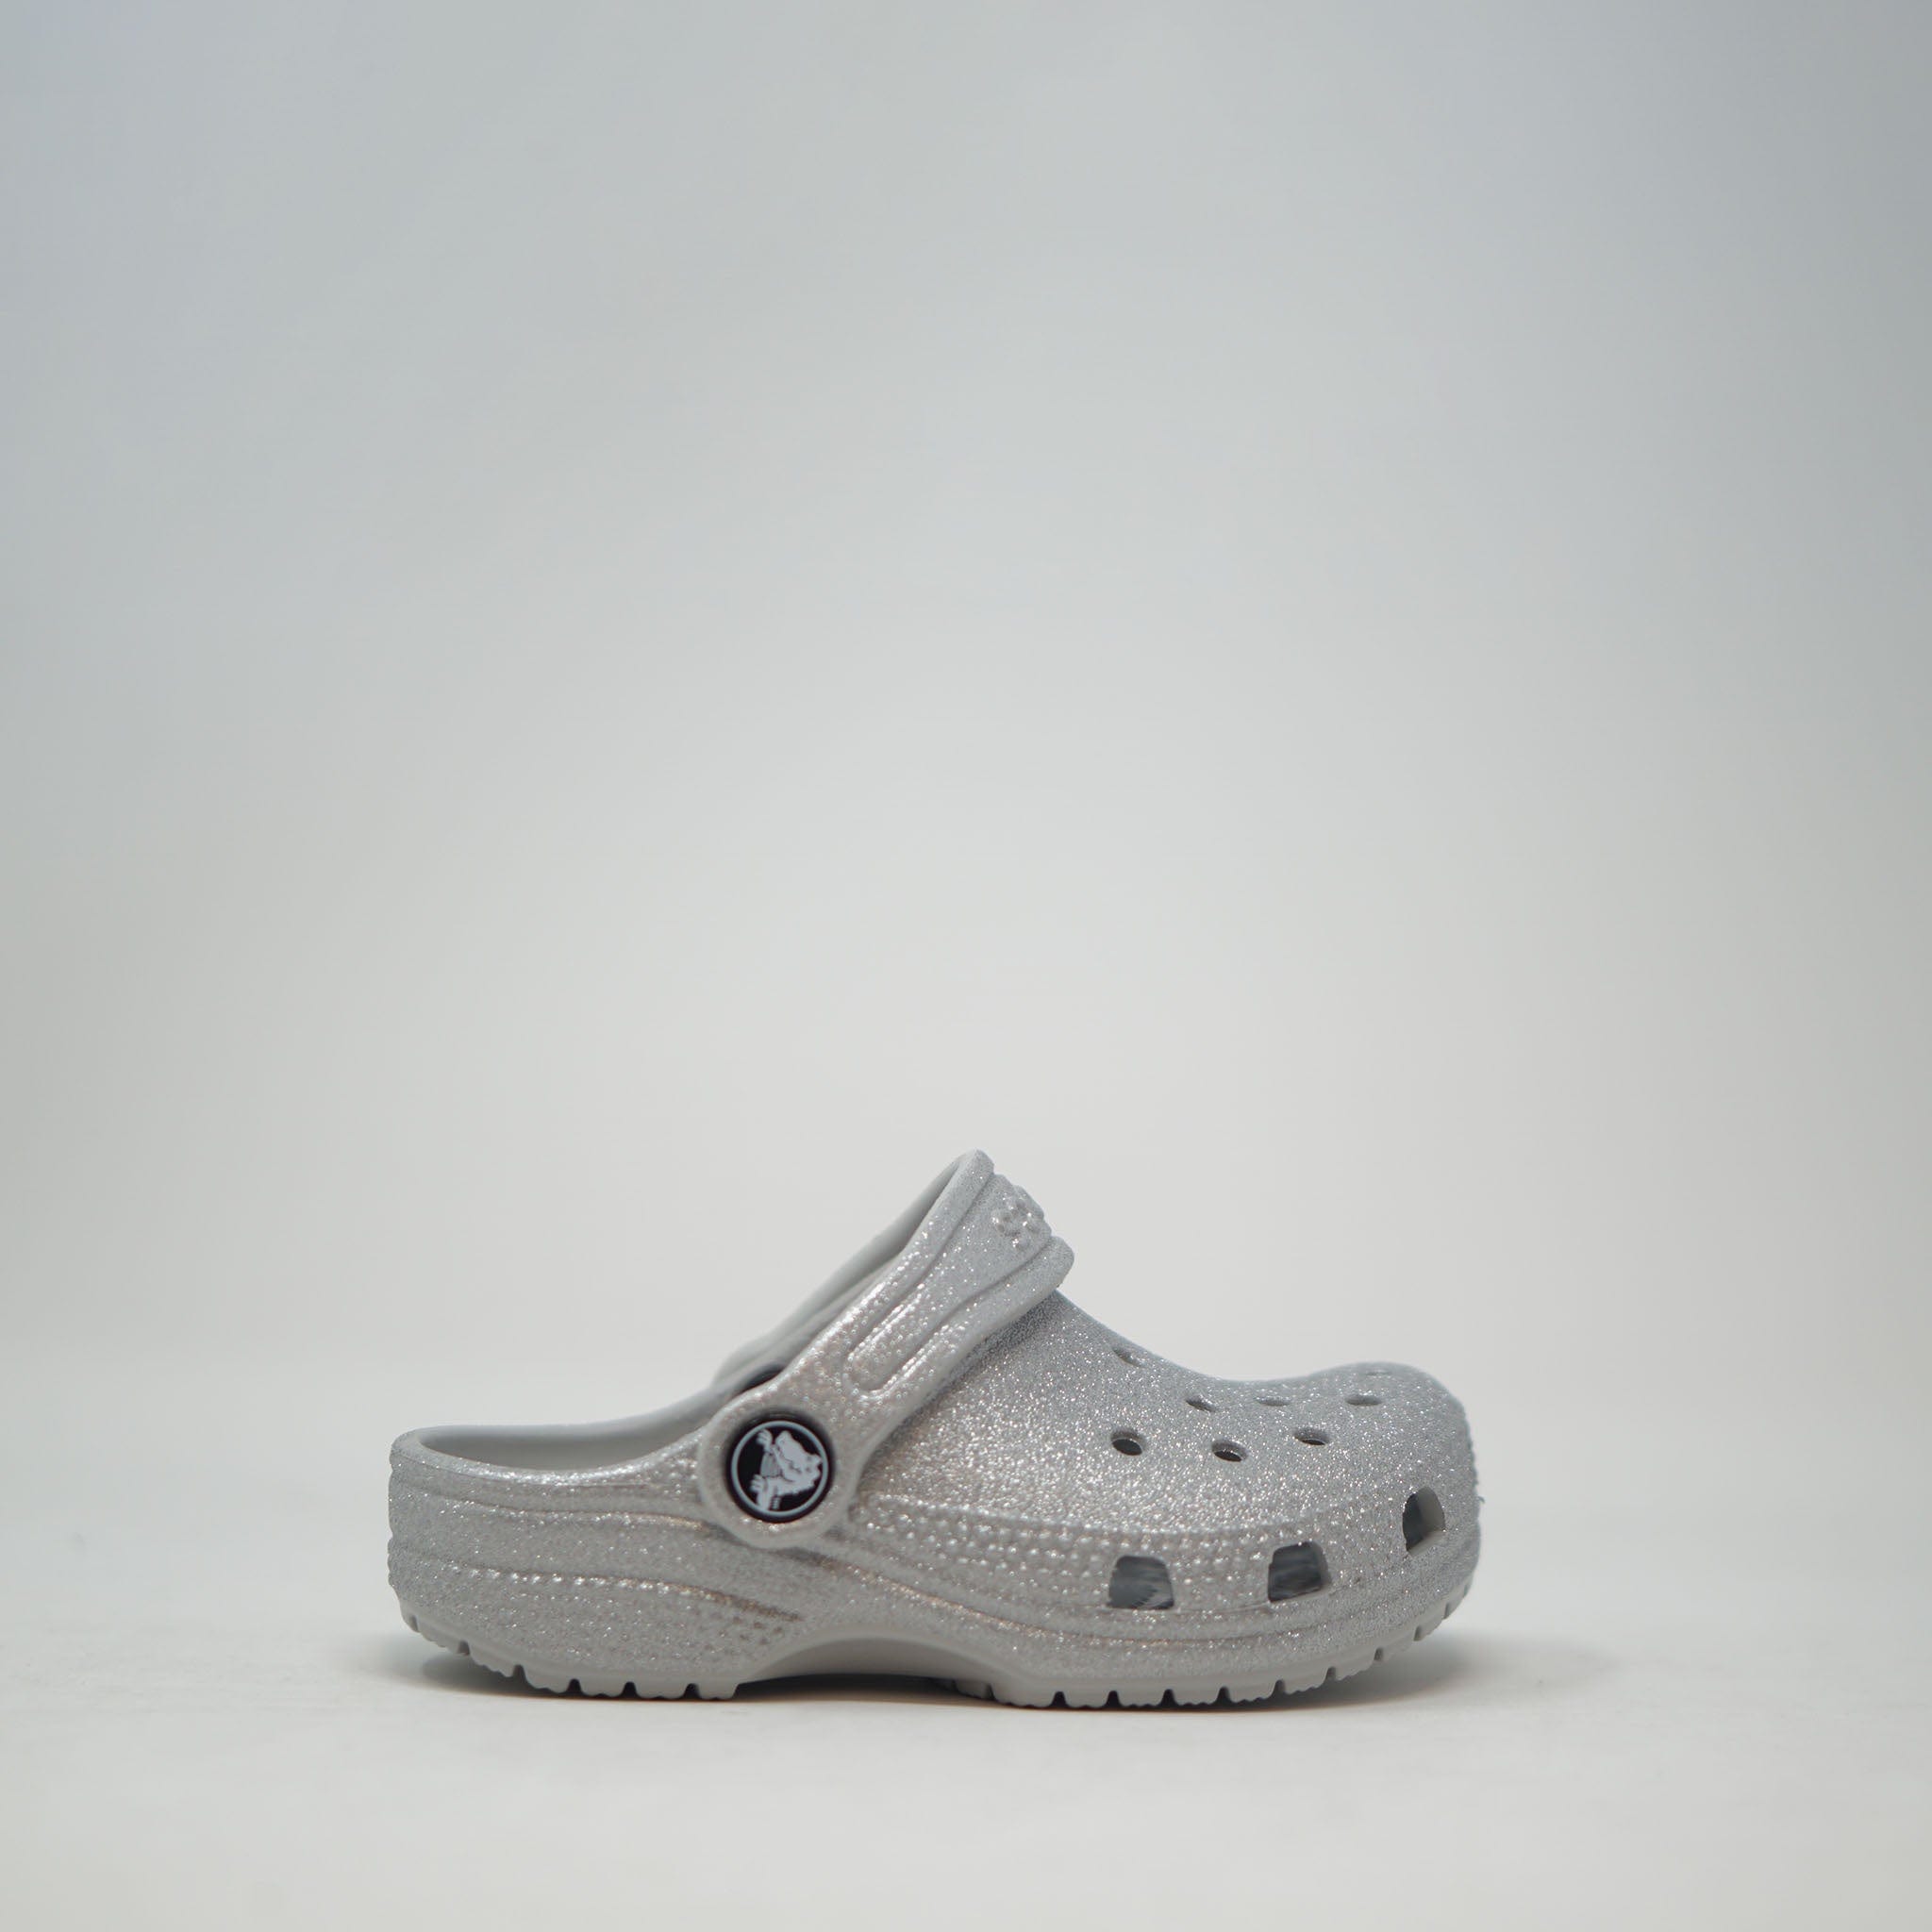 Toddler Classic Crocs Silver Glitter SHOES  - ZIGZAG Footwear